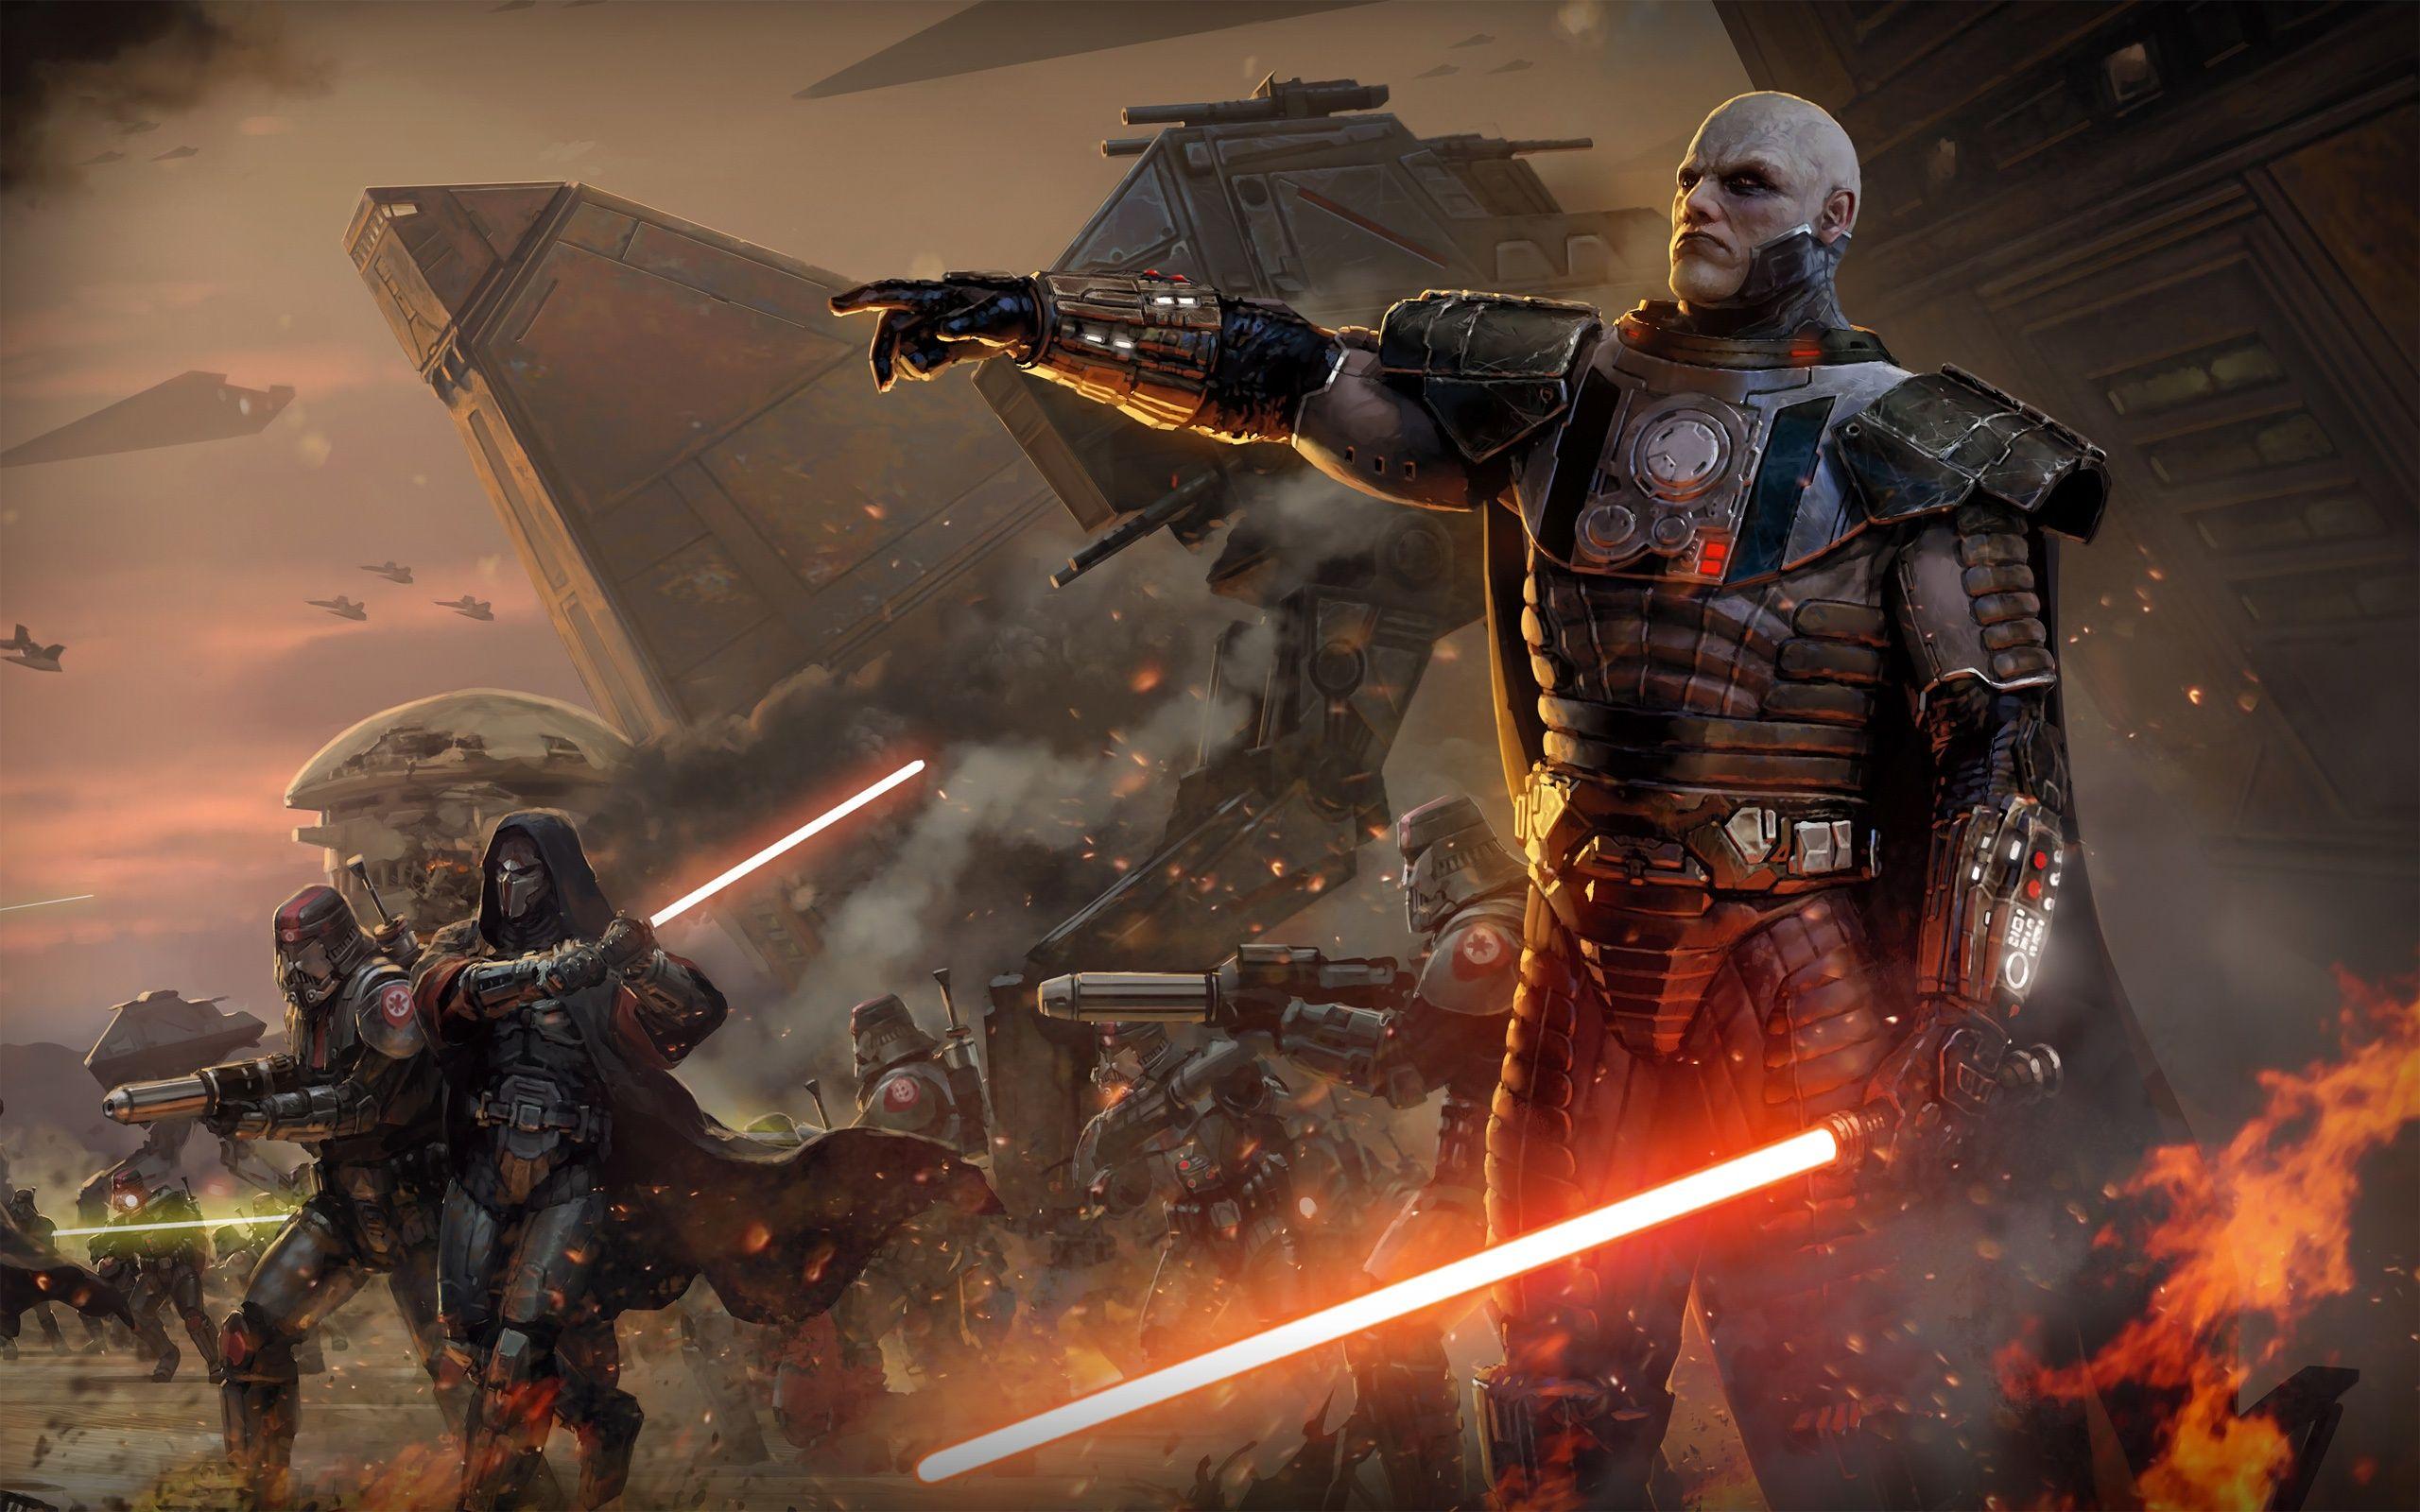 Star Wars: The Old Republic Full HD Wallpapers and Backgrounds Image